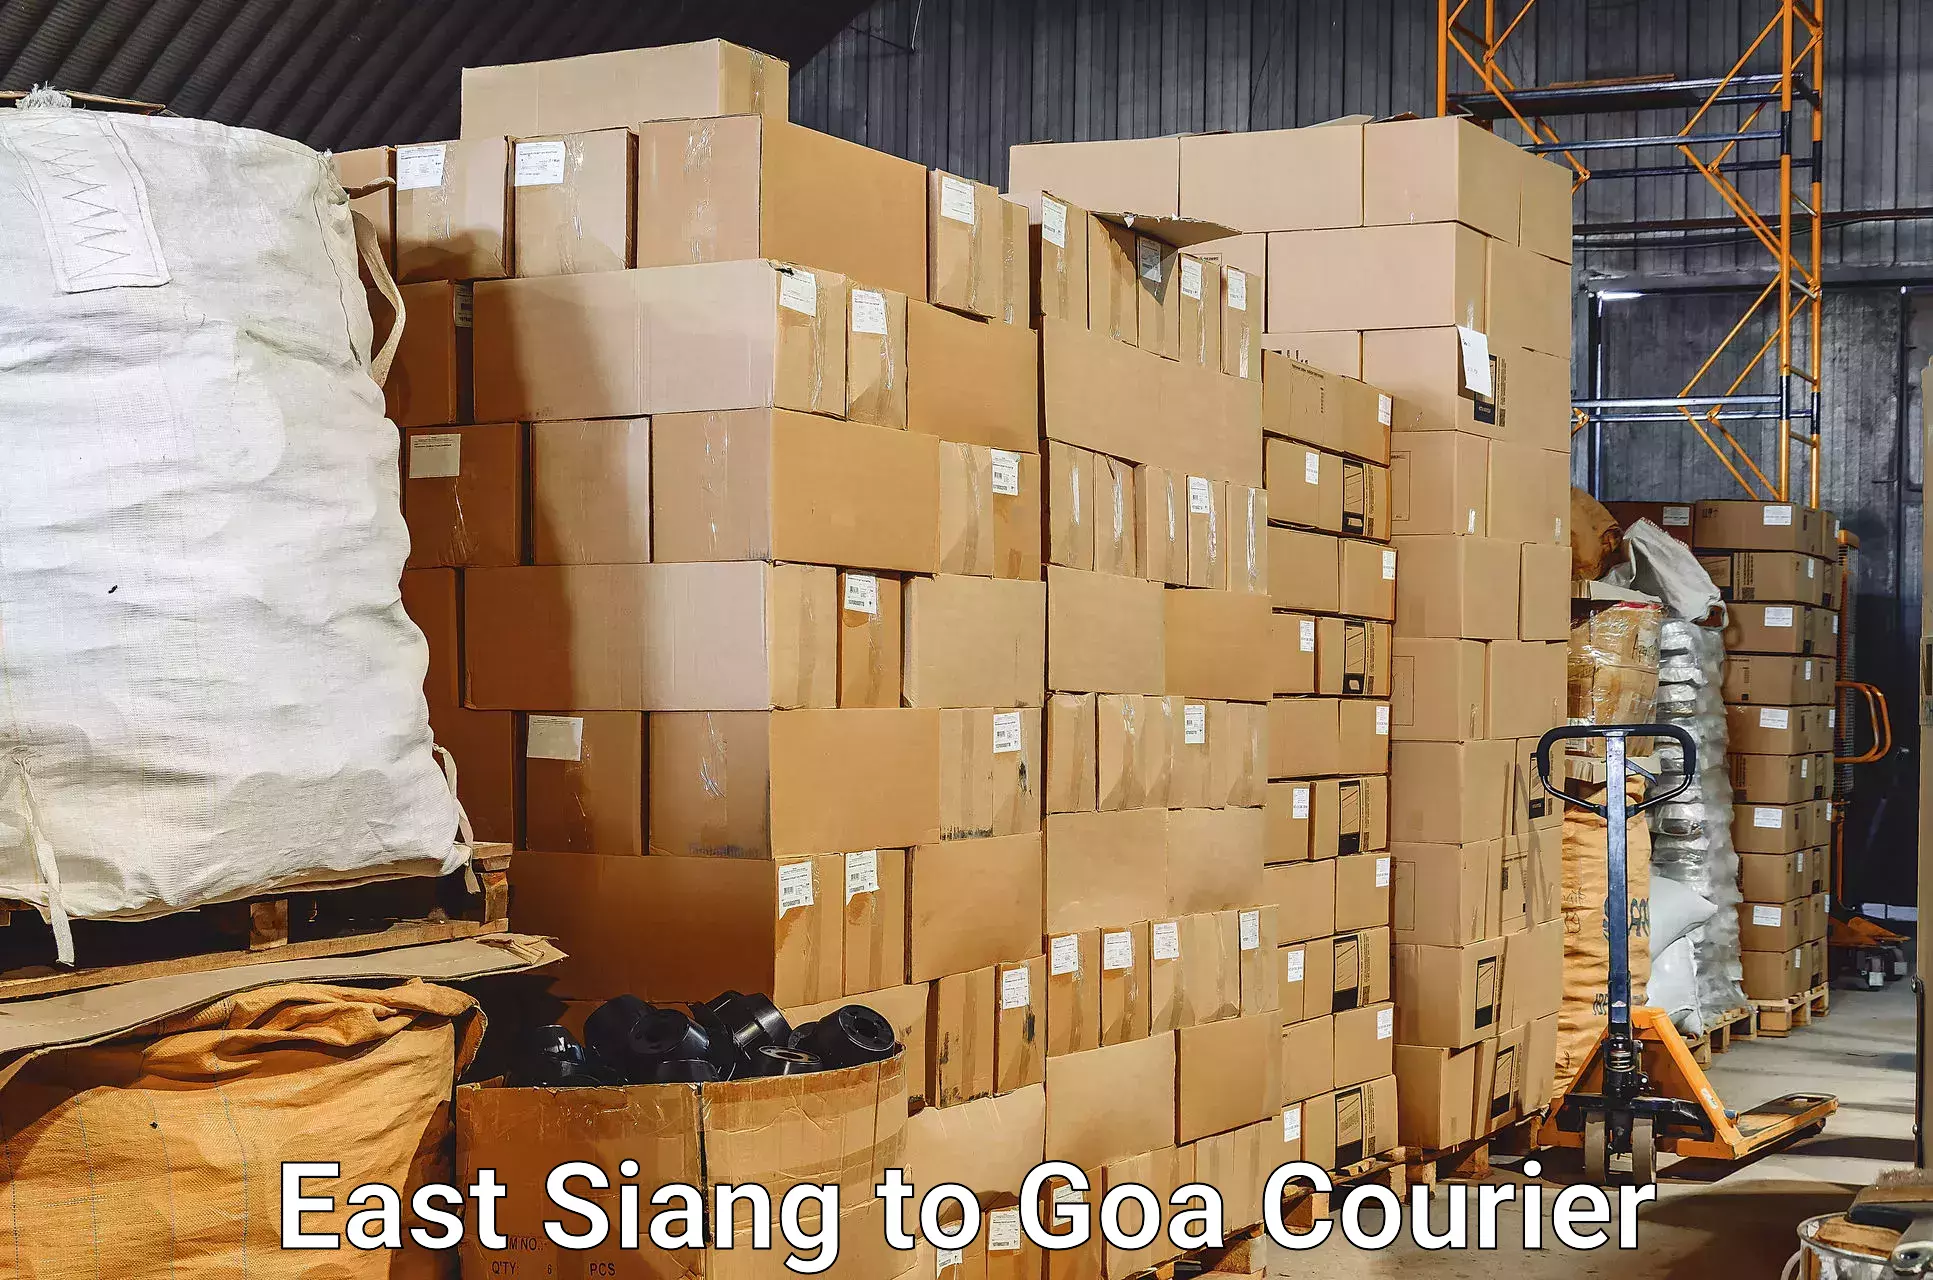 Regional luggage transport East Siang to Goa